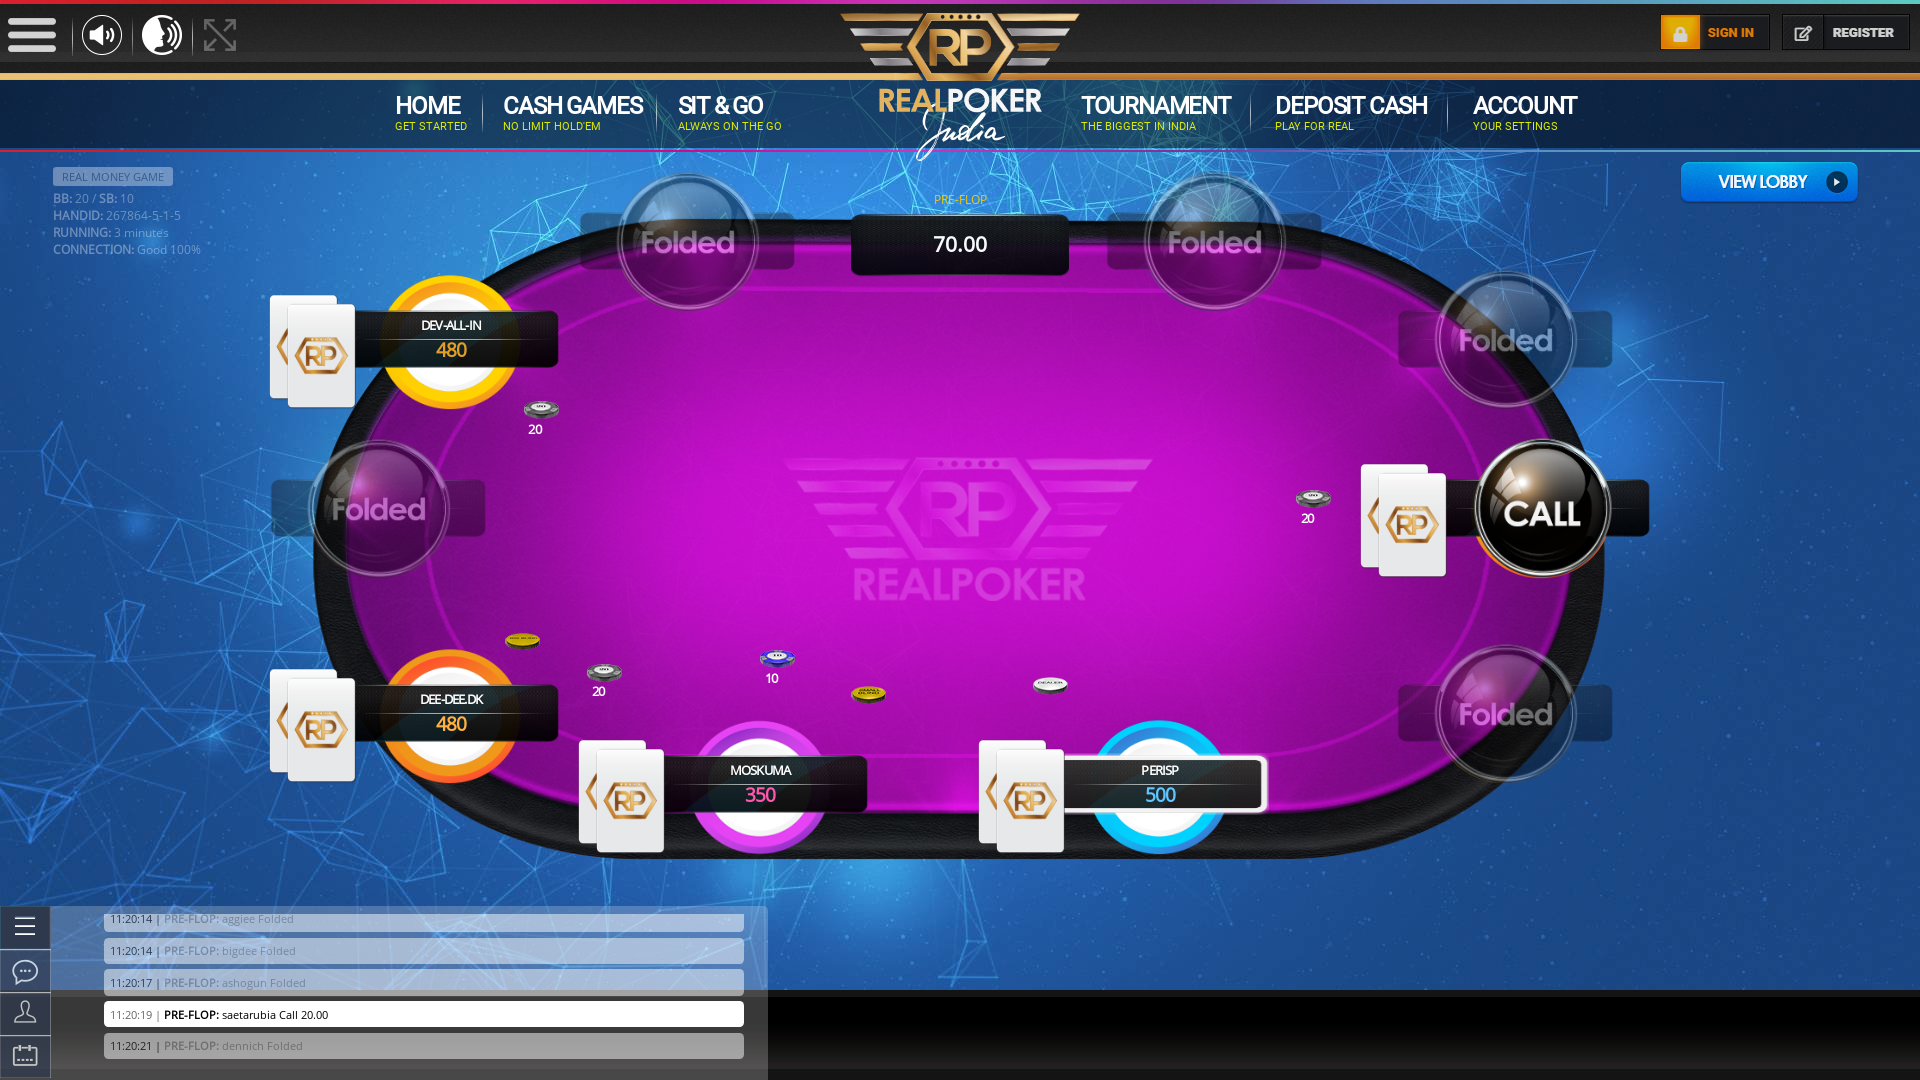 Real poker 10 player table in the 3rd minute of the match